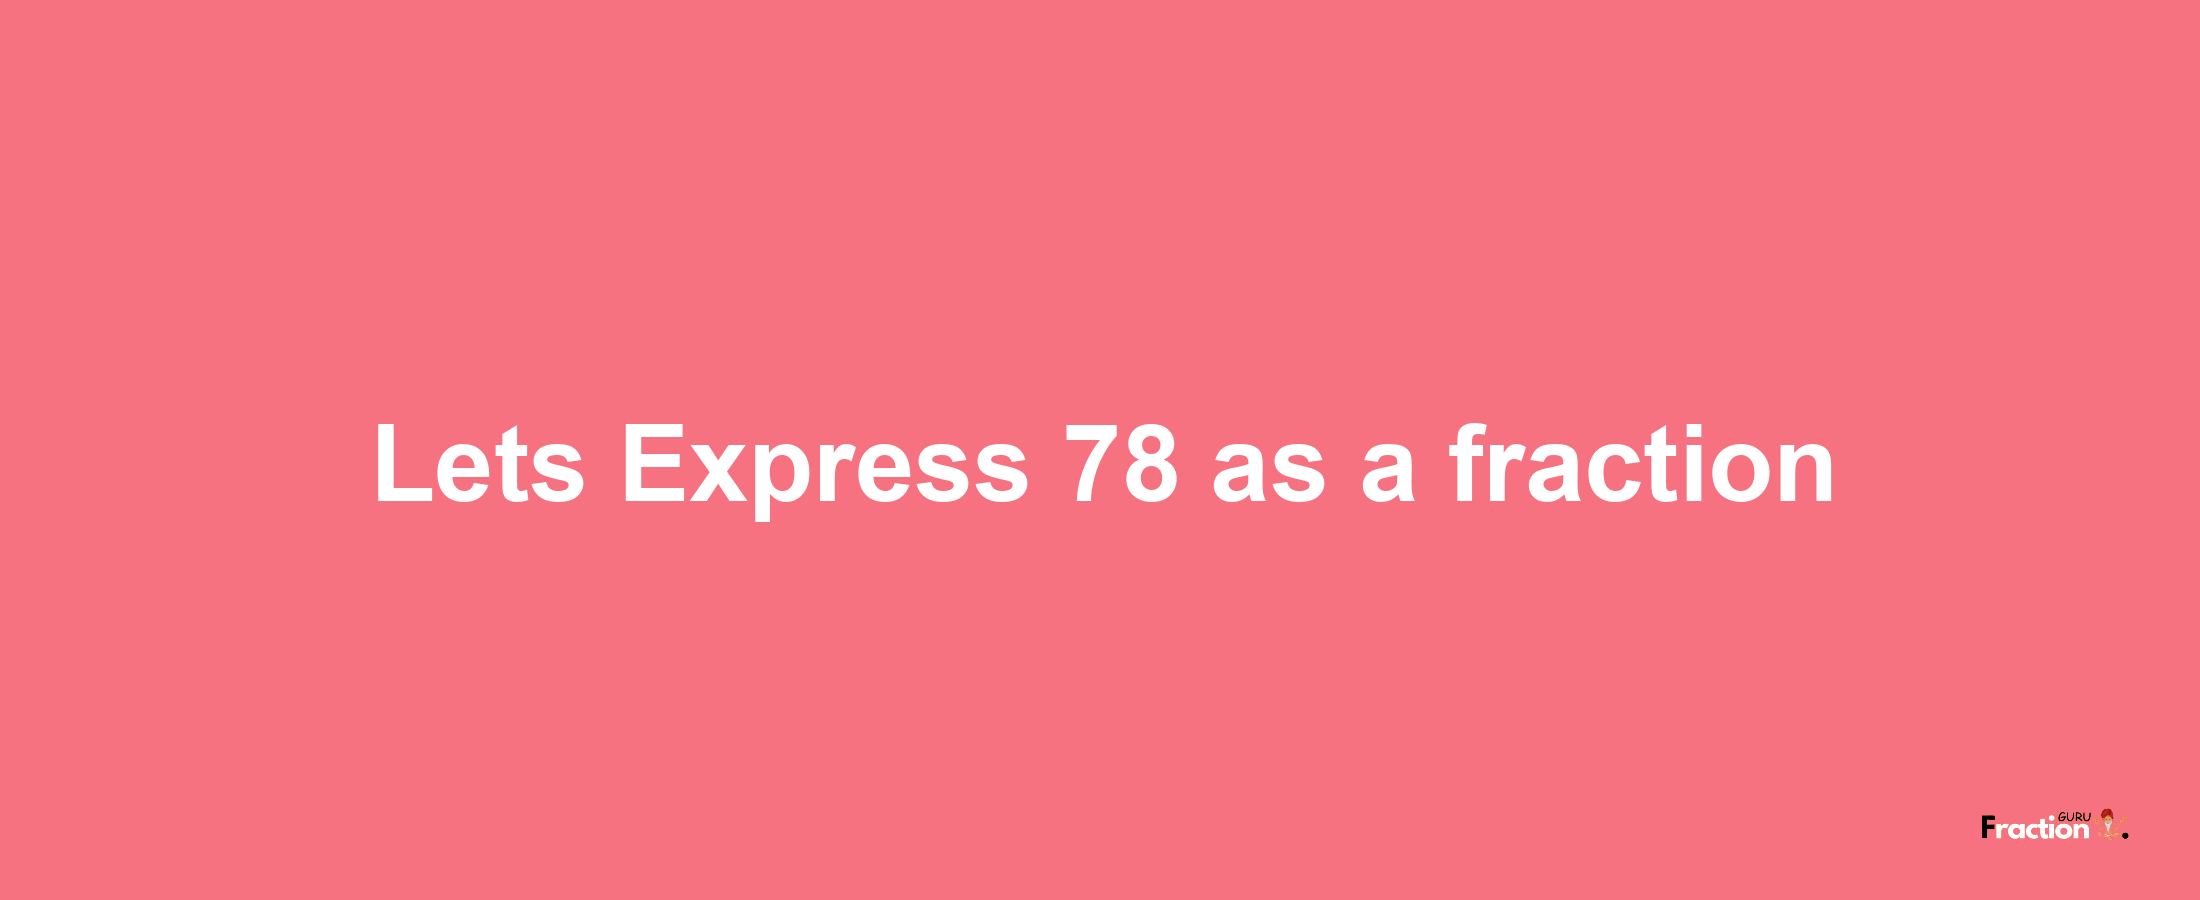 Lets Express 78 as afraction